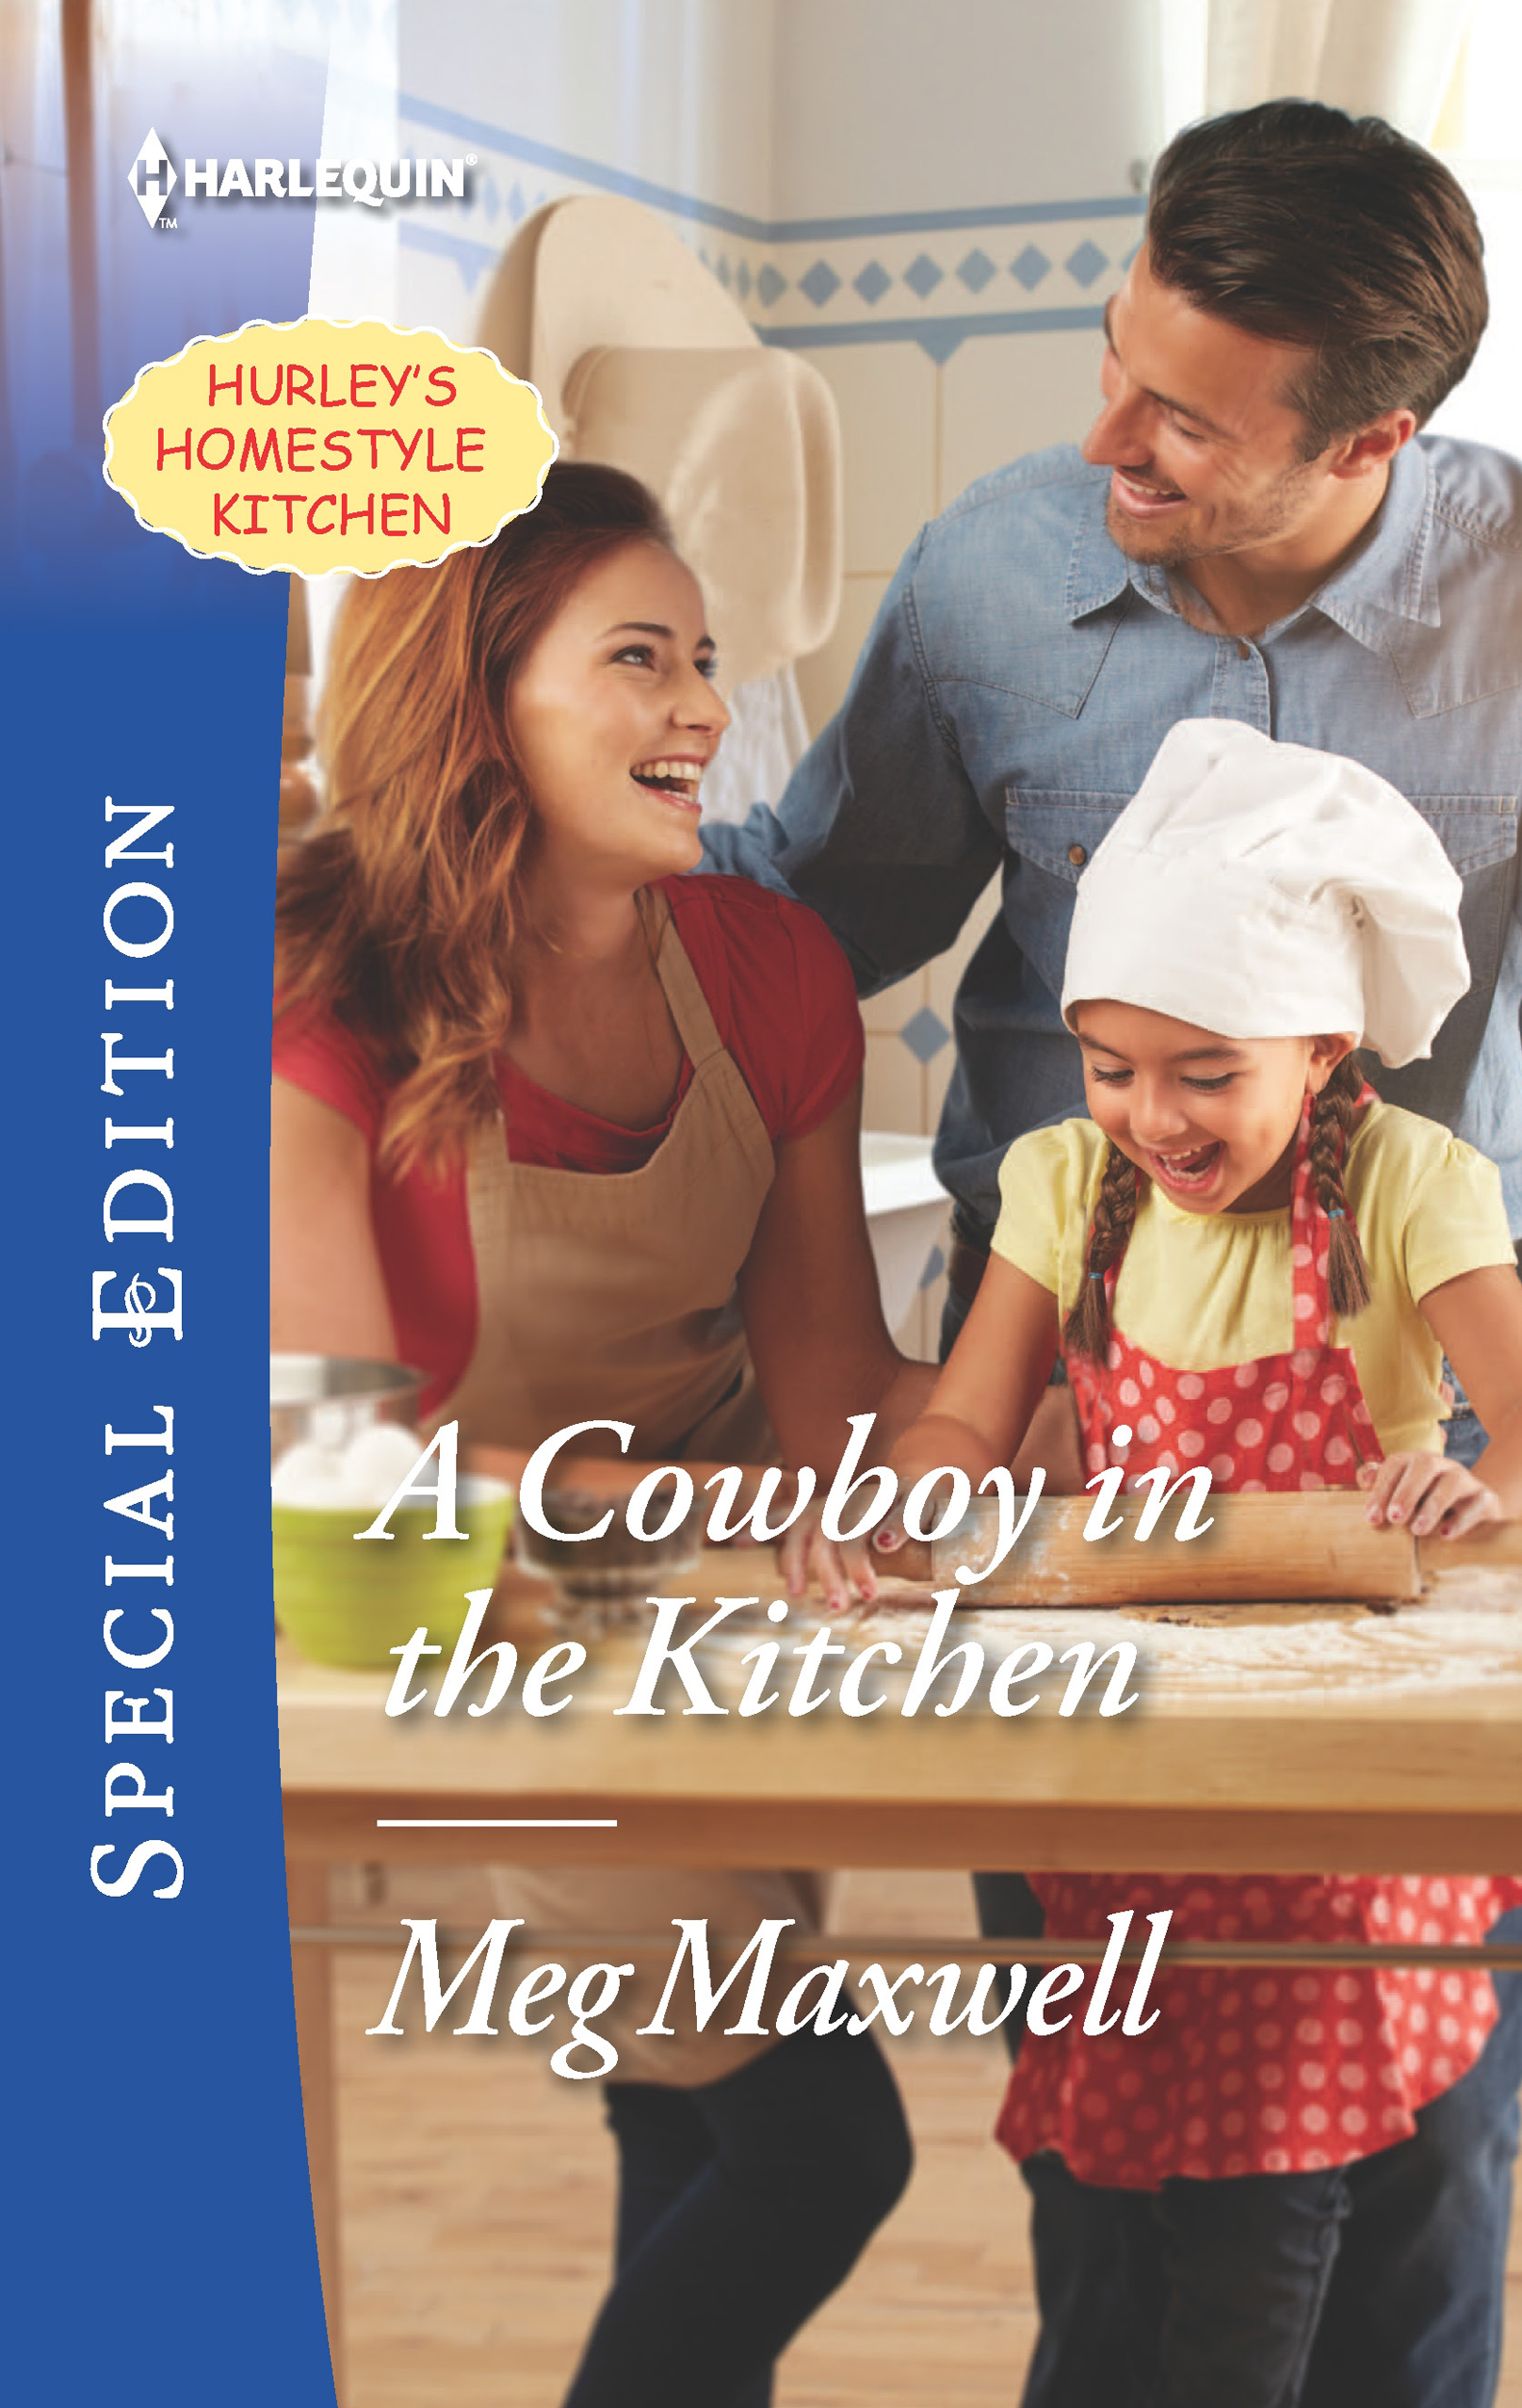 A Cowboy in the Kitchen (2015) by Meg Maxwell